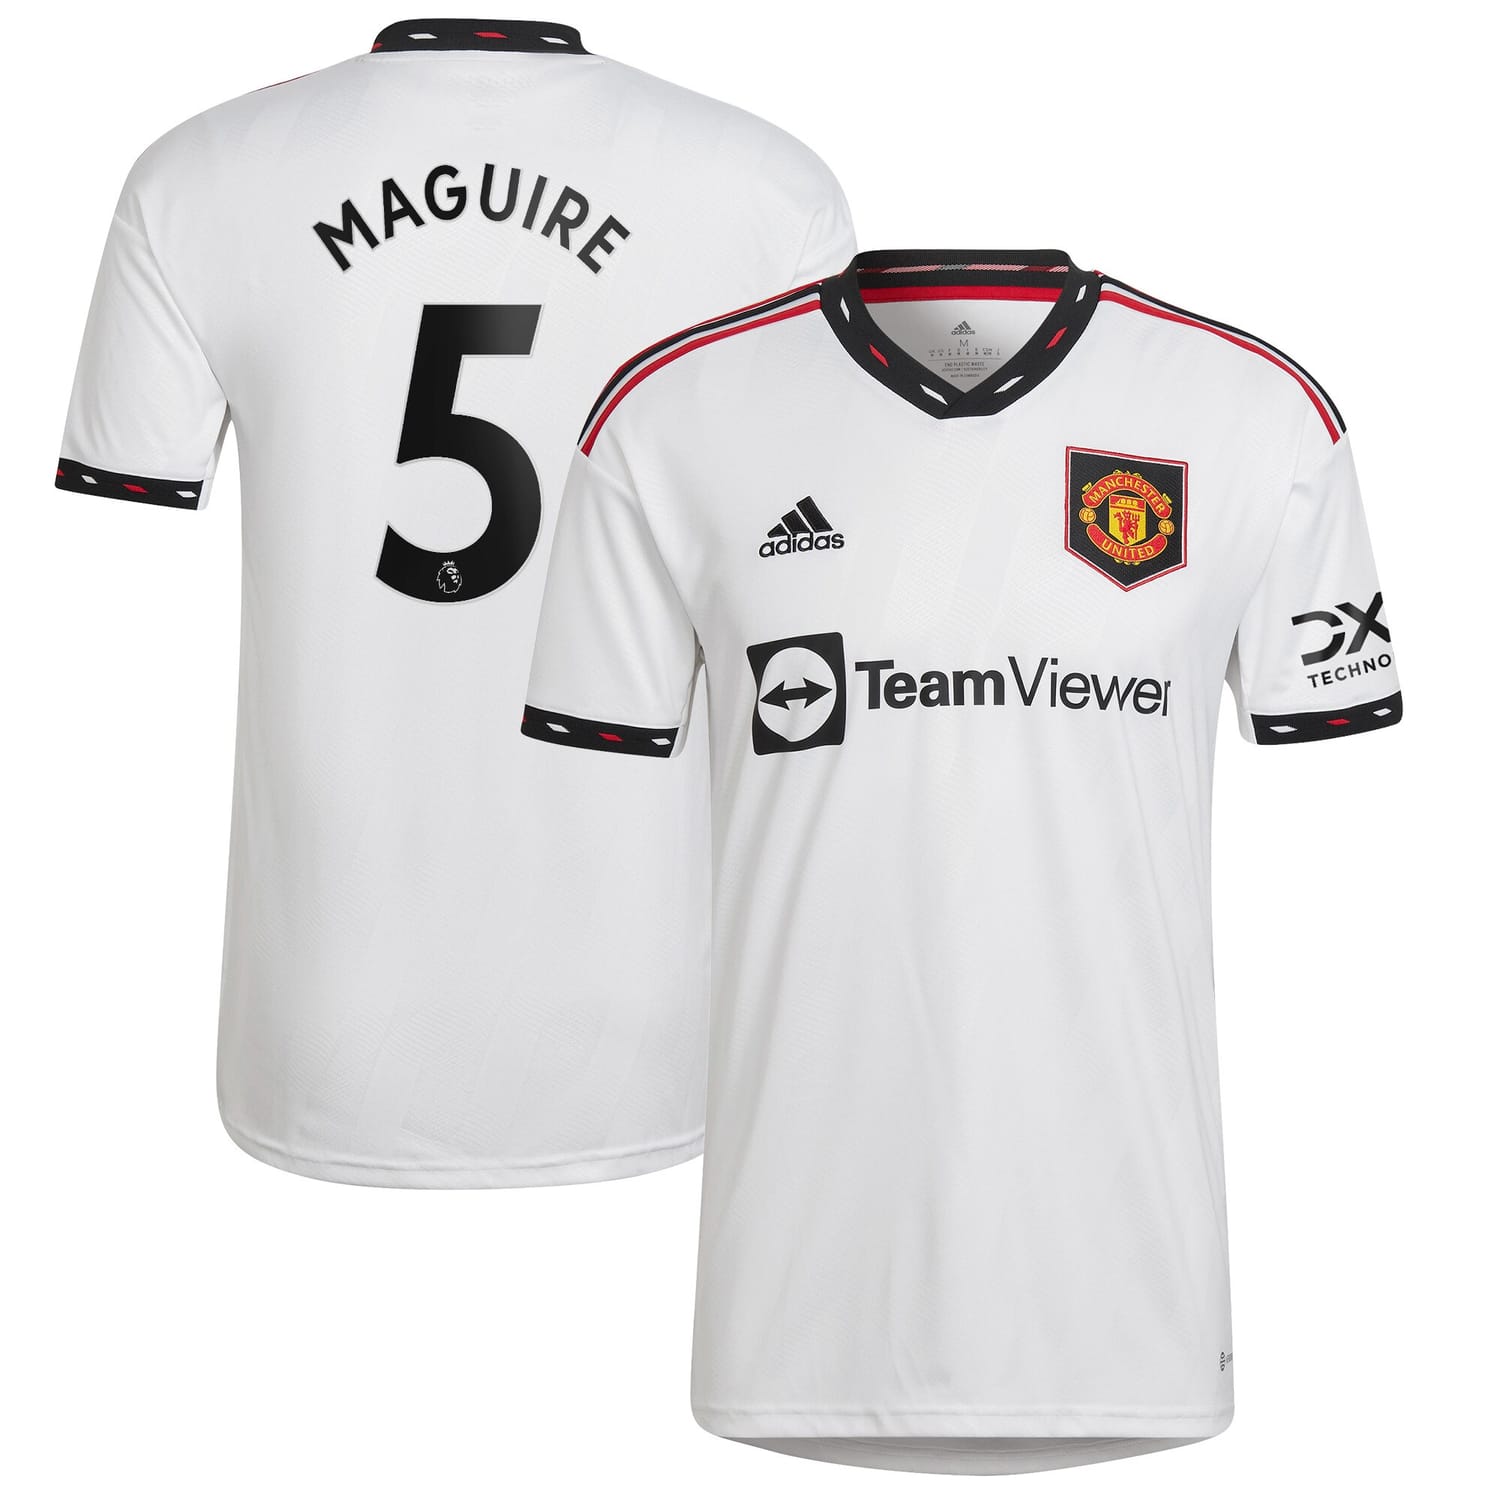 Premier League Manchester United Away Jersey Shirt 2022-23 player Harry Maguire 5 printing for Men